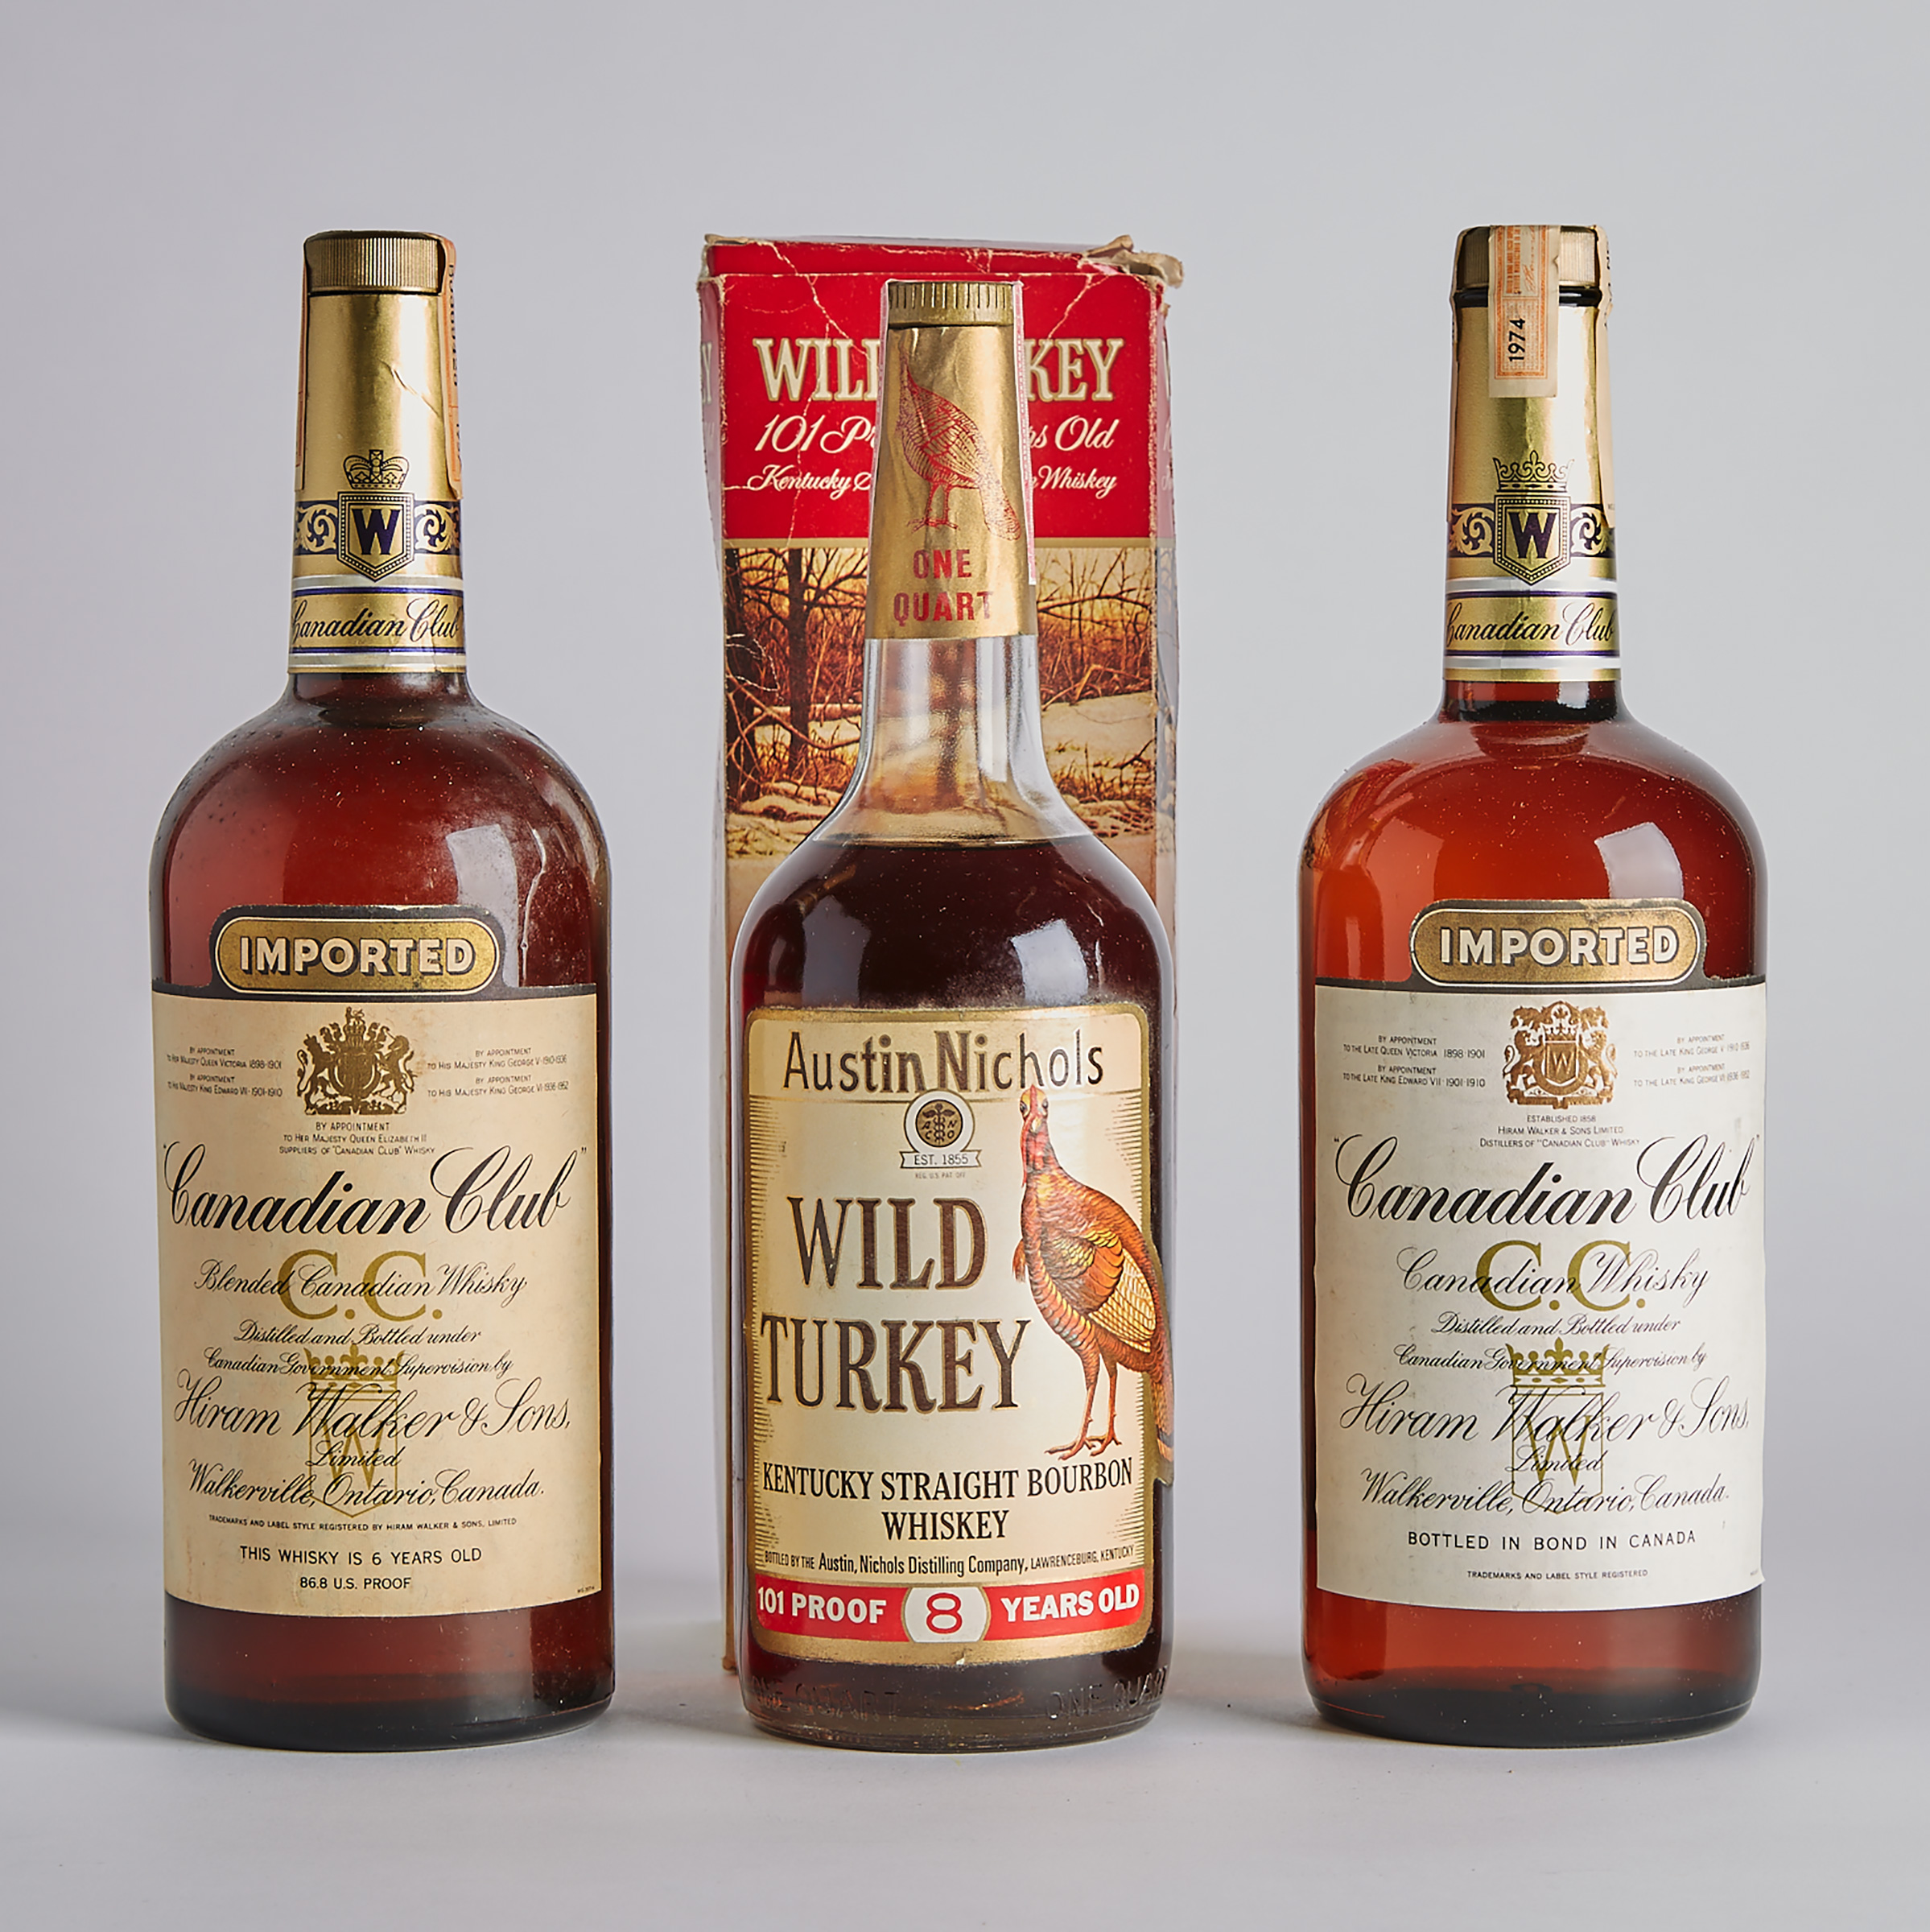 CANADIAN CLUB BLENDED CANADIAN WHISKY (ONE 40 OZ)
CANADIAN CLUB CANADIAN WHISKY (ONE 40 OZ)
WILD TURKEY KENTUCKY STRAIGHT BOURBON WHISKEY 8 YEARS (ONE 1500 ML)